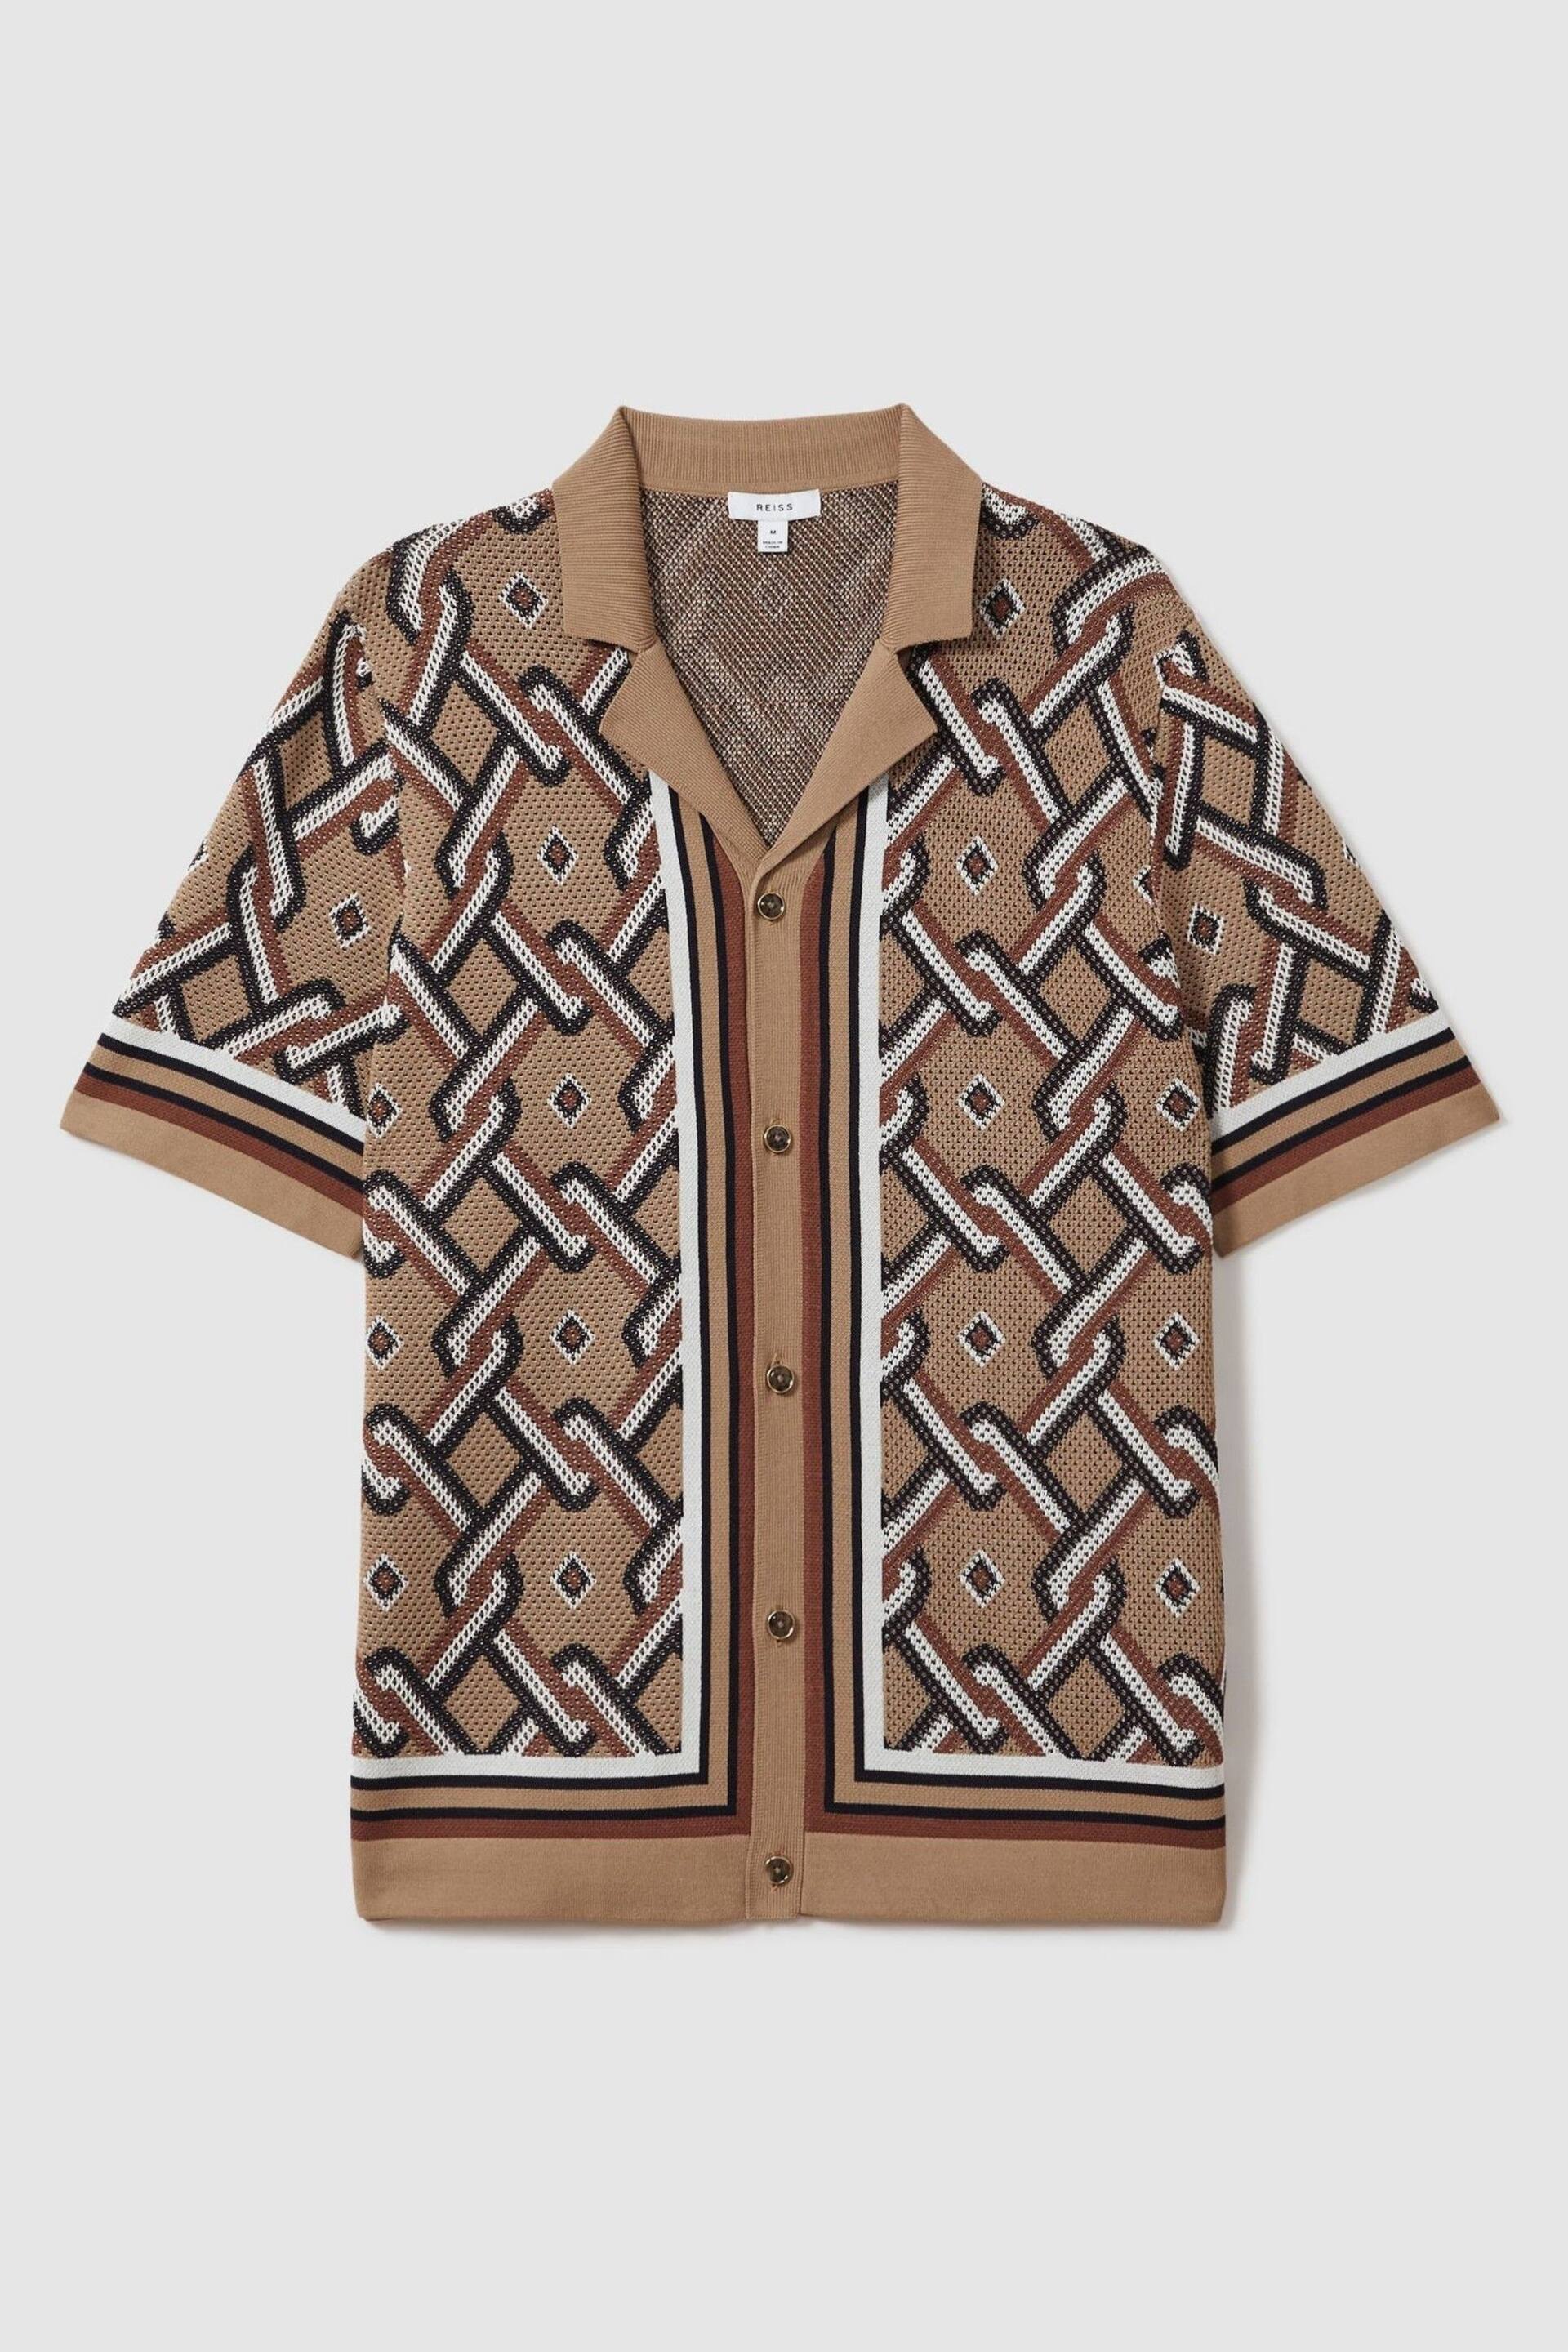 Reiss Camel Multi Hyde Knitted Cuban Collar Shirt - Image 2 of 6